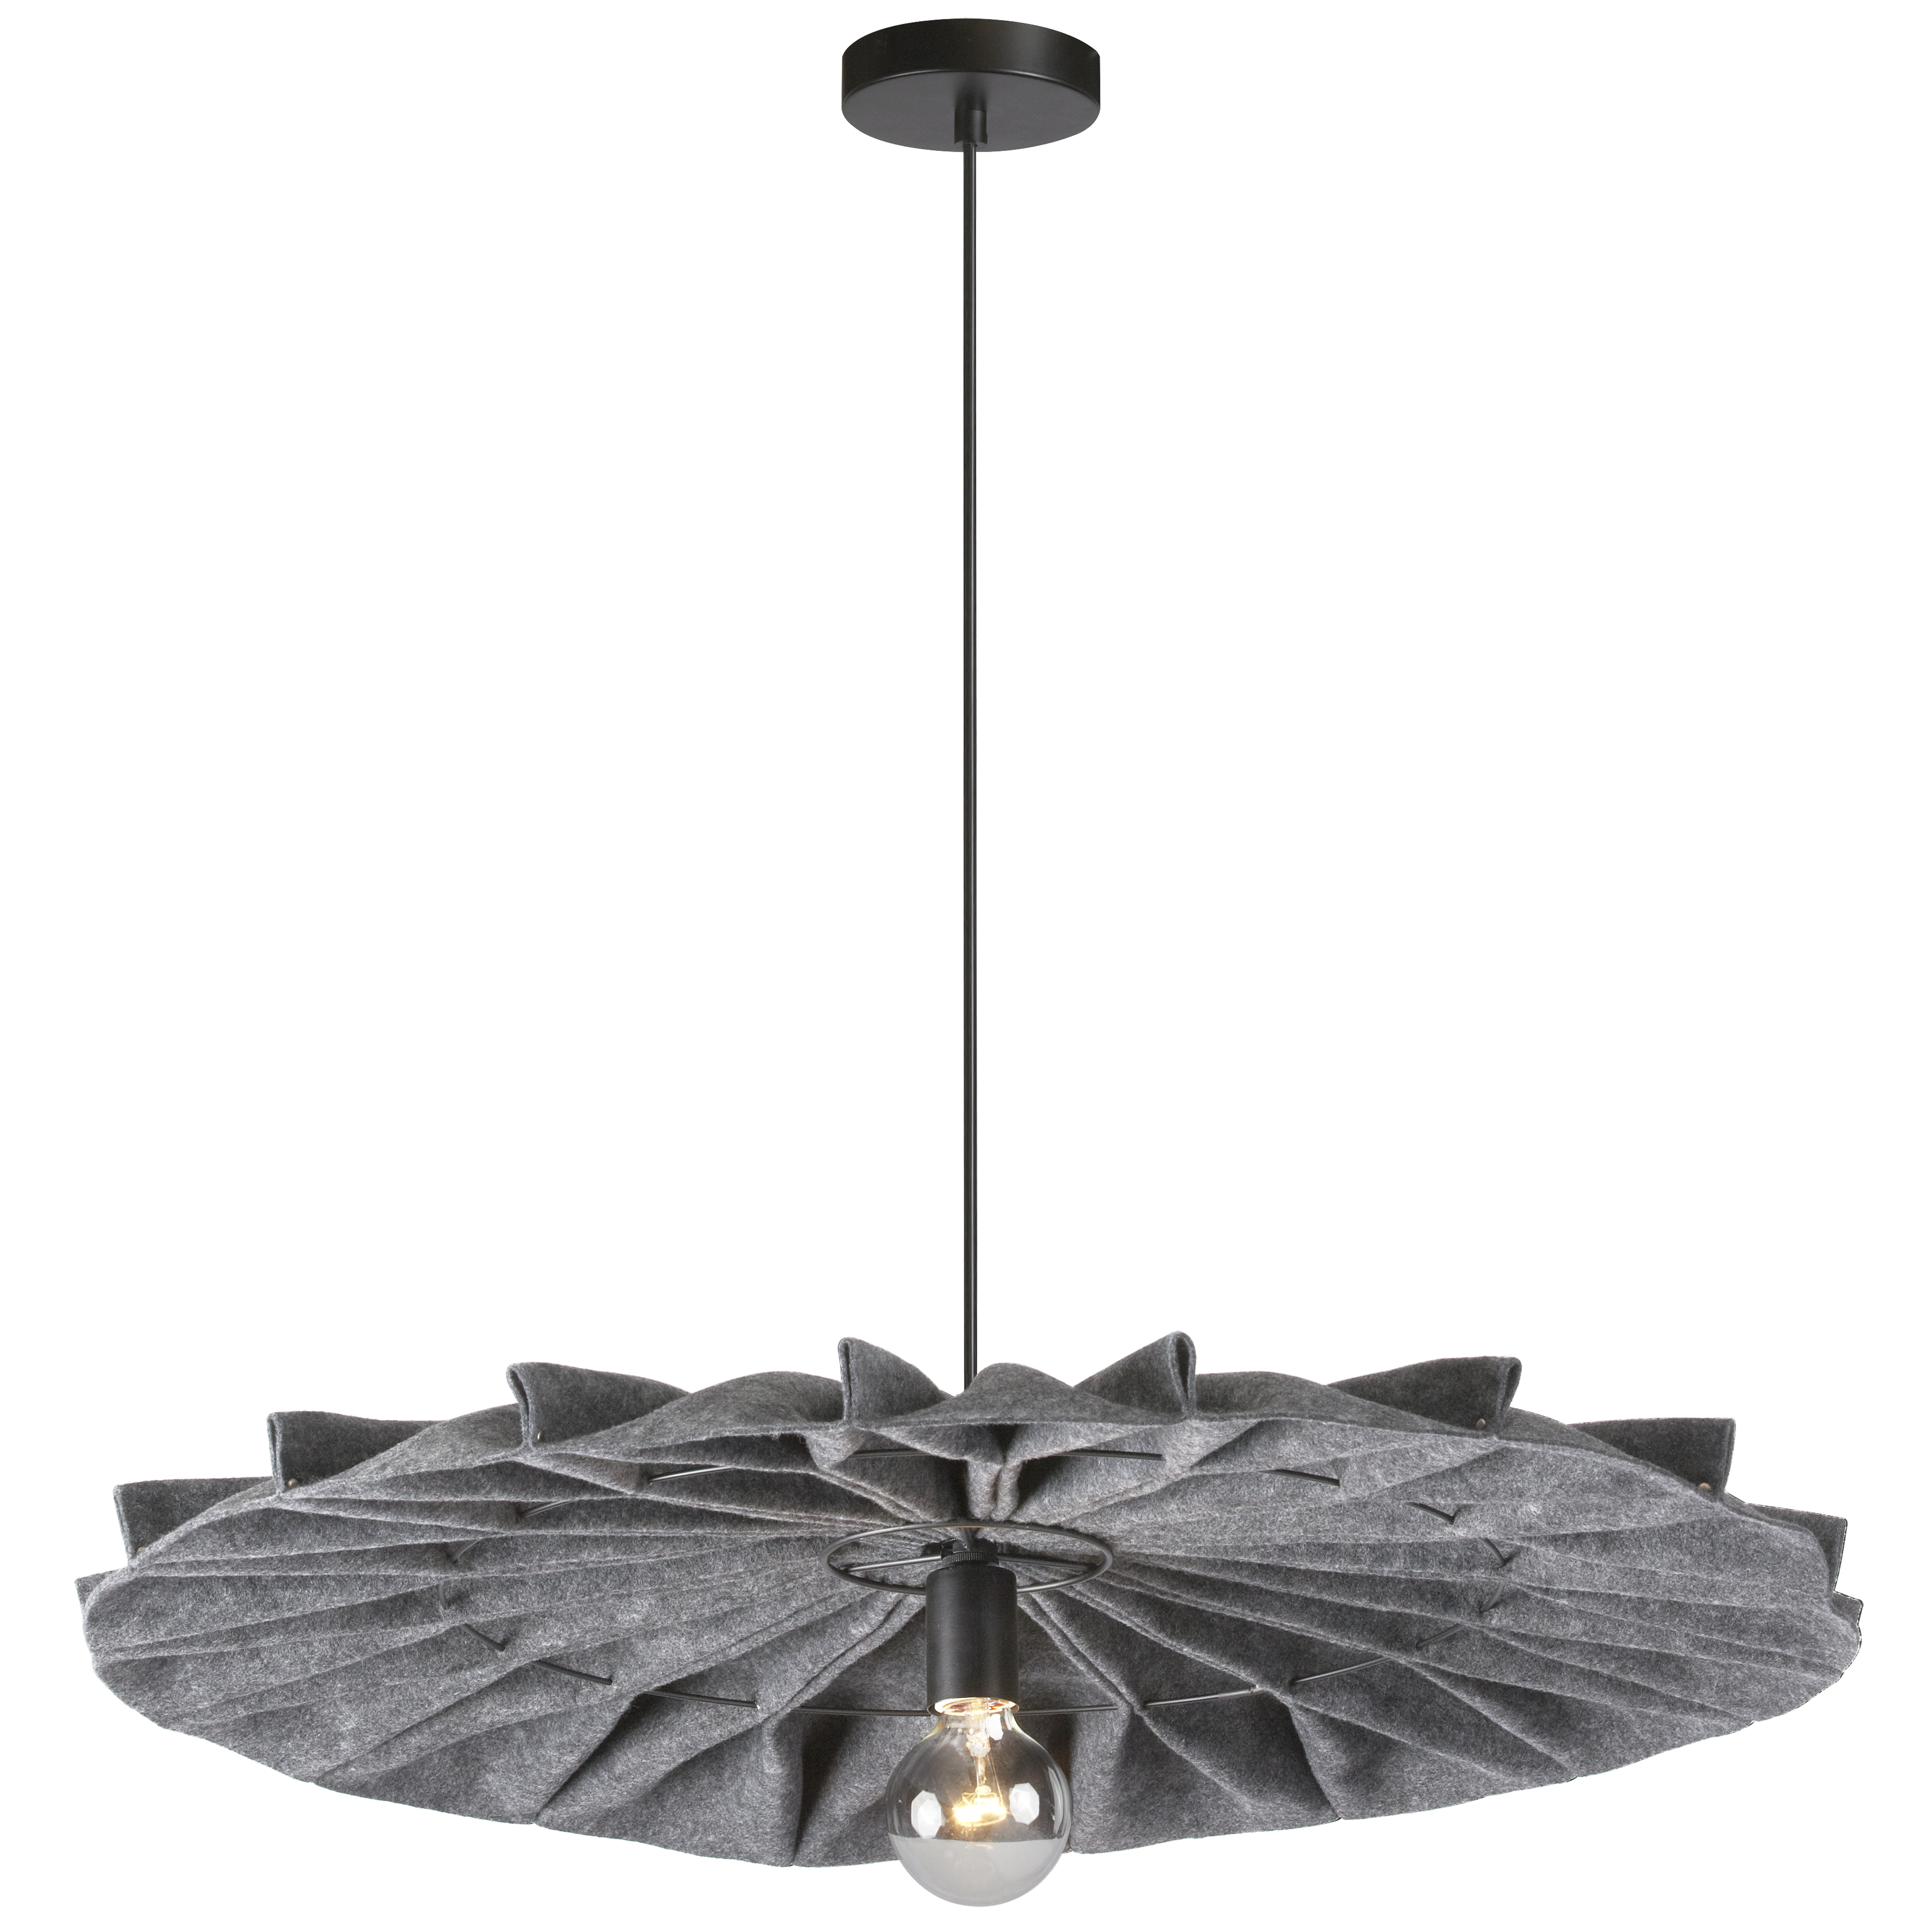 Delightfully different, the Plegado family of lighting is characterized by its unique silhouette. The look is uber-chic in a Parisian mode, and will enhance décor schemes from early 20th century to contemporary with its versatile appeal. A metal frame in discreet matte black threads ingeniously into and around a pleated gray felt shade. The effect is intricate and draws the eye immediately. Plegado lighting will create its own focal point while enhancing your living or dining room, or a stylish office suite.